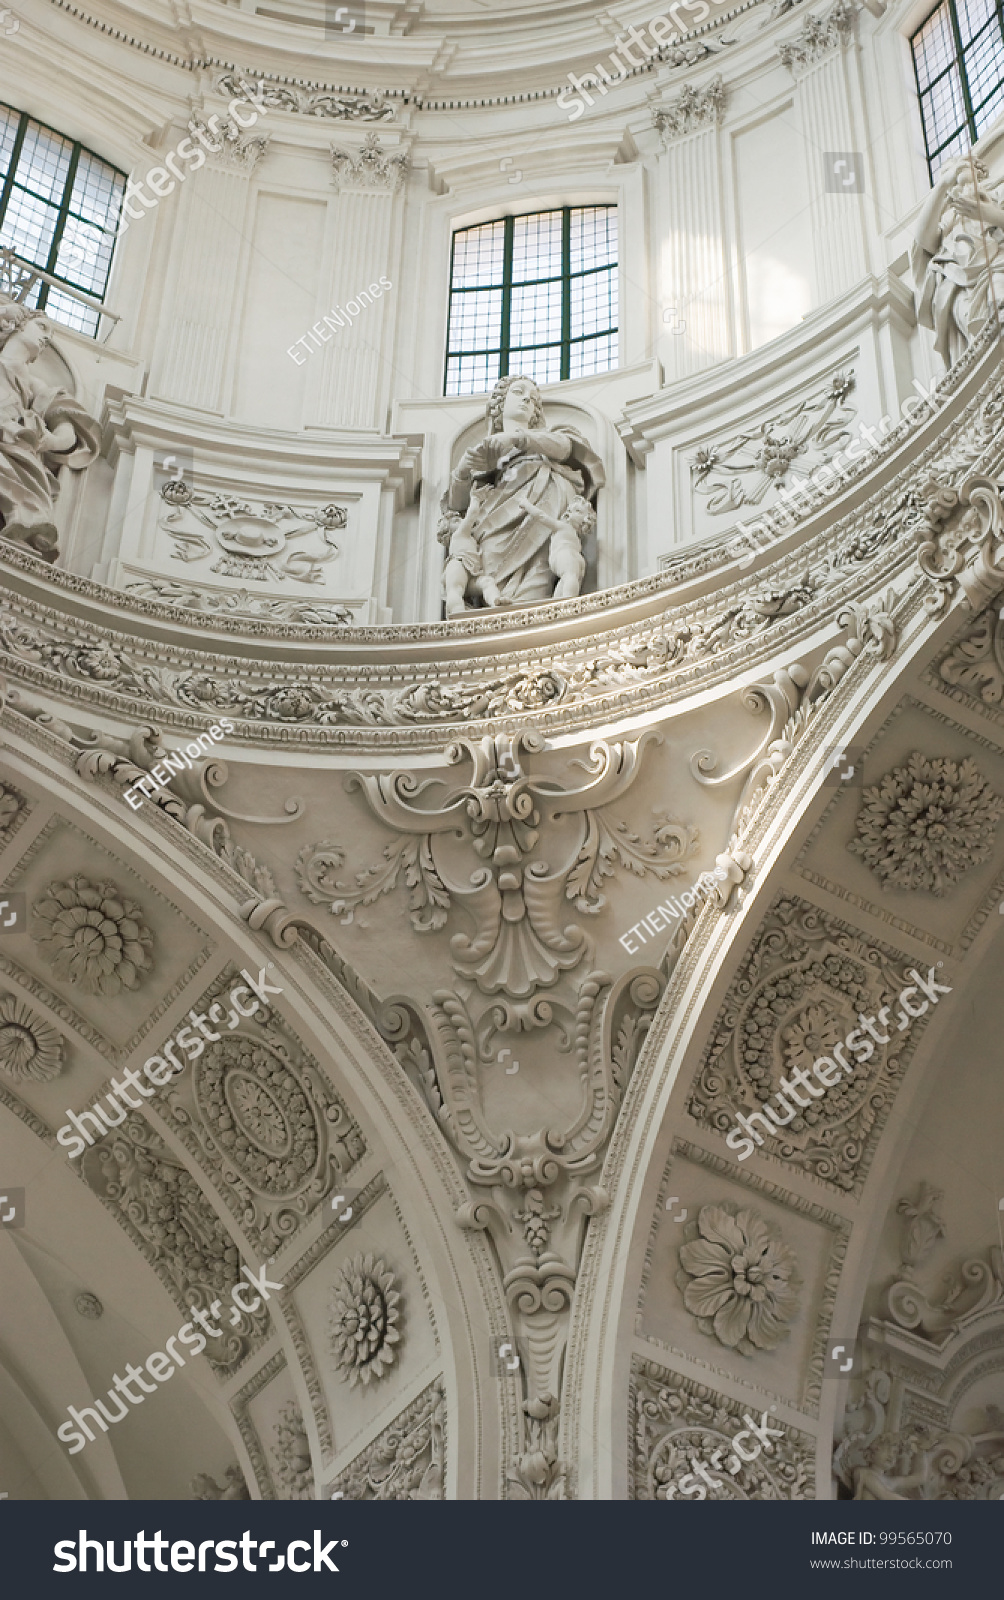 Interior View of Stucco Decoration in High Baroque Style #99565070